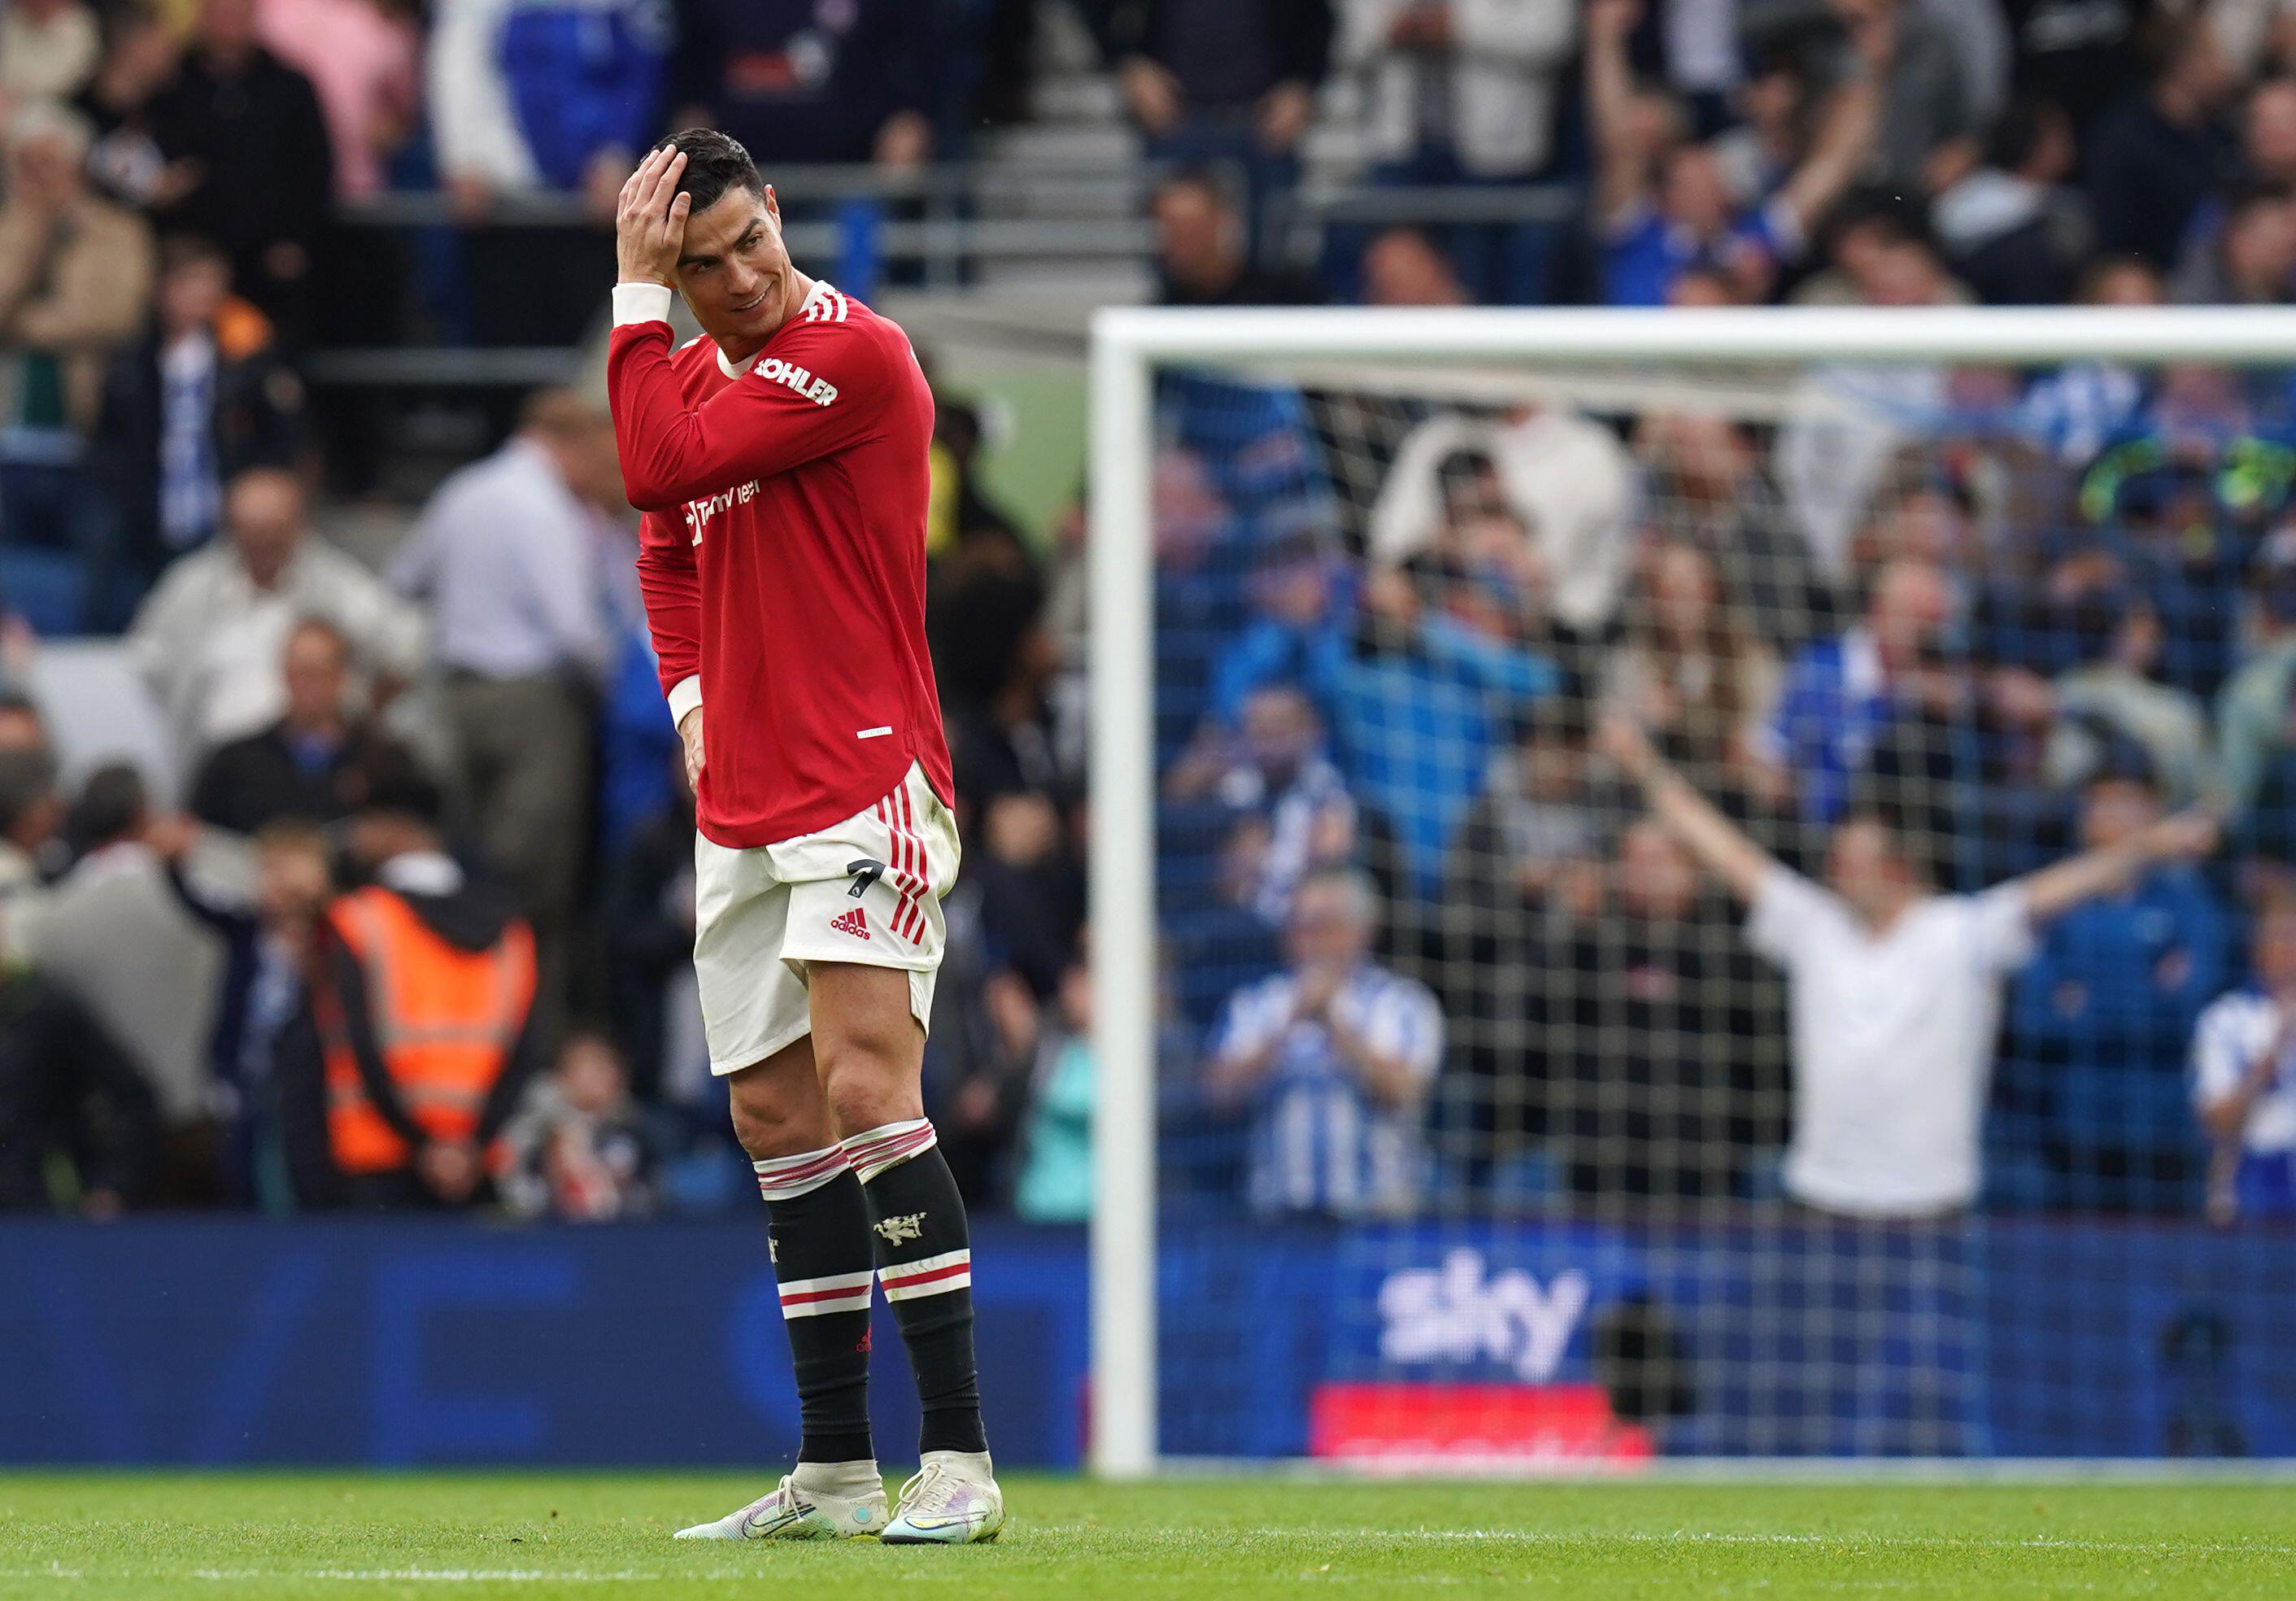 Premier League: Manchester United suffer EMBARRASSING defeat by Brighton, Red Devils fail to qualify for 2022/23 Champions League, Watch Brighton beat Man United HIGHLIGHTS